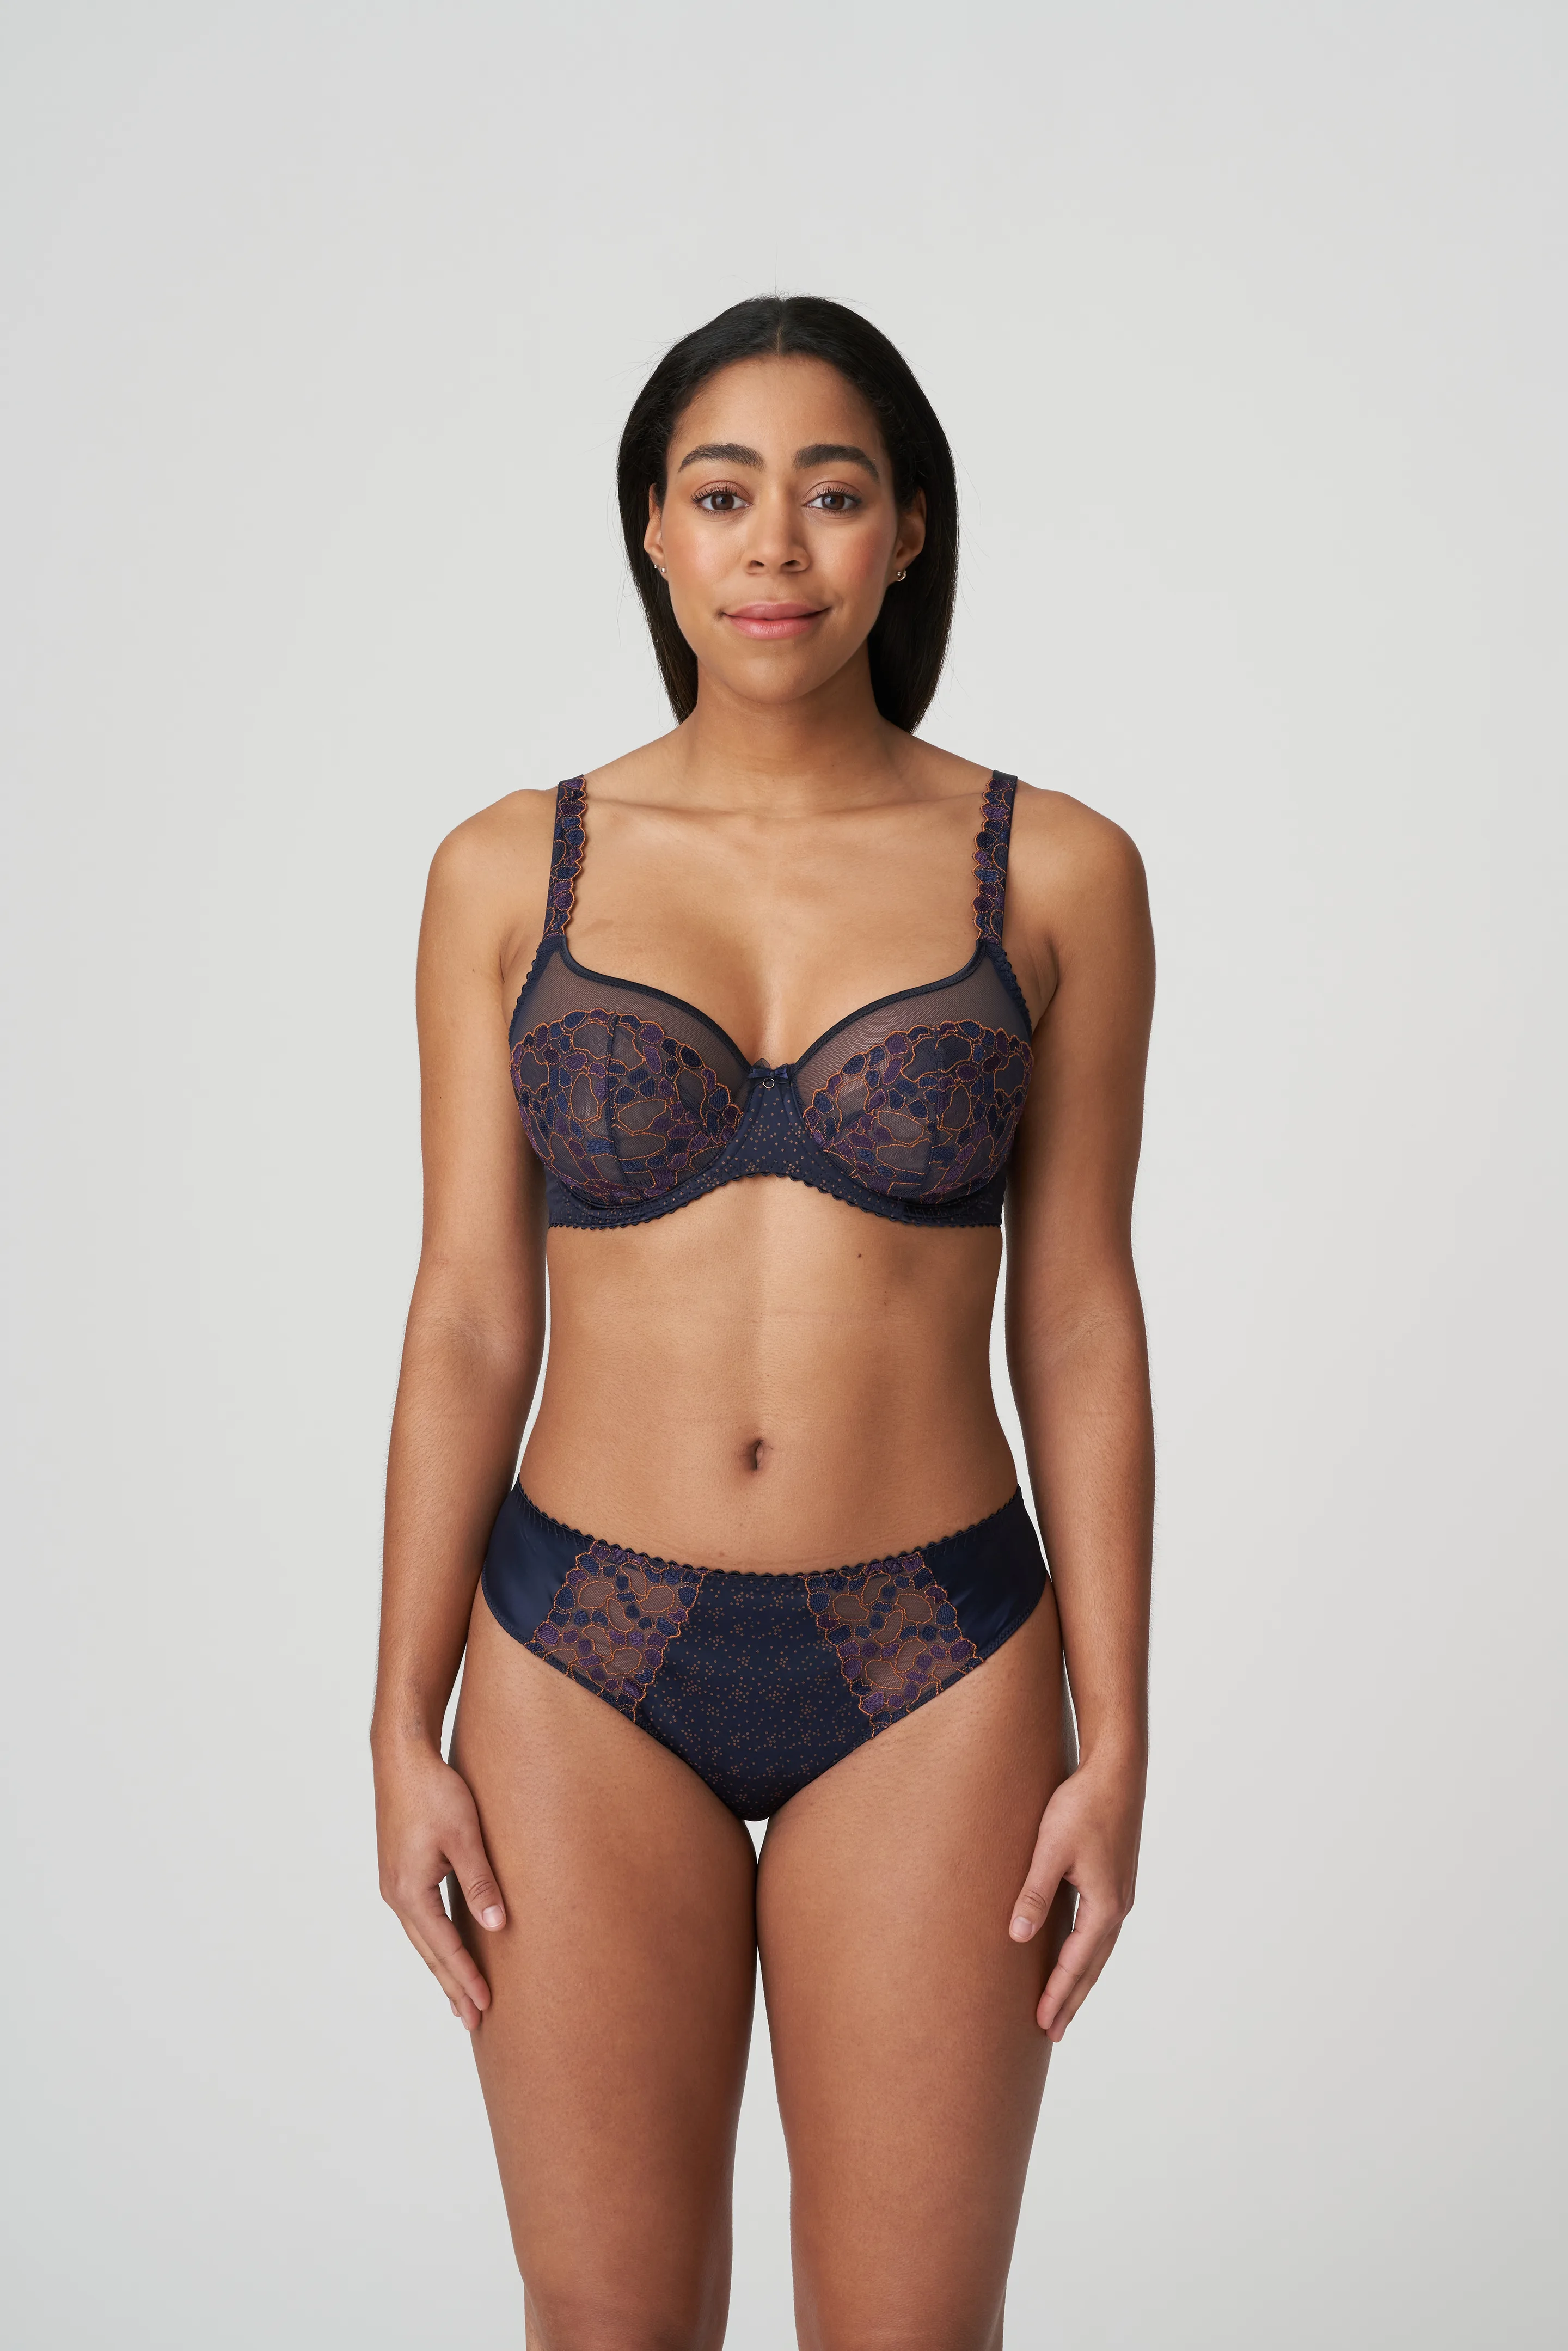 Big cup bra, lace embroidery, B to M-cup